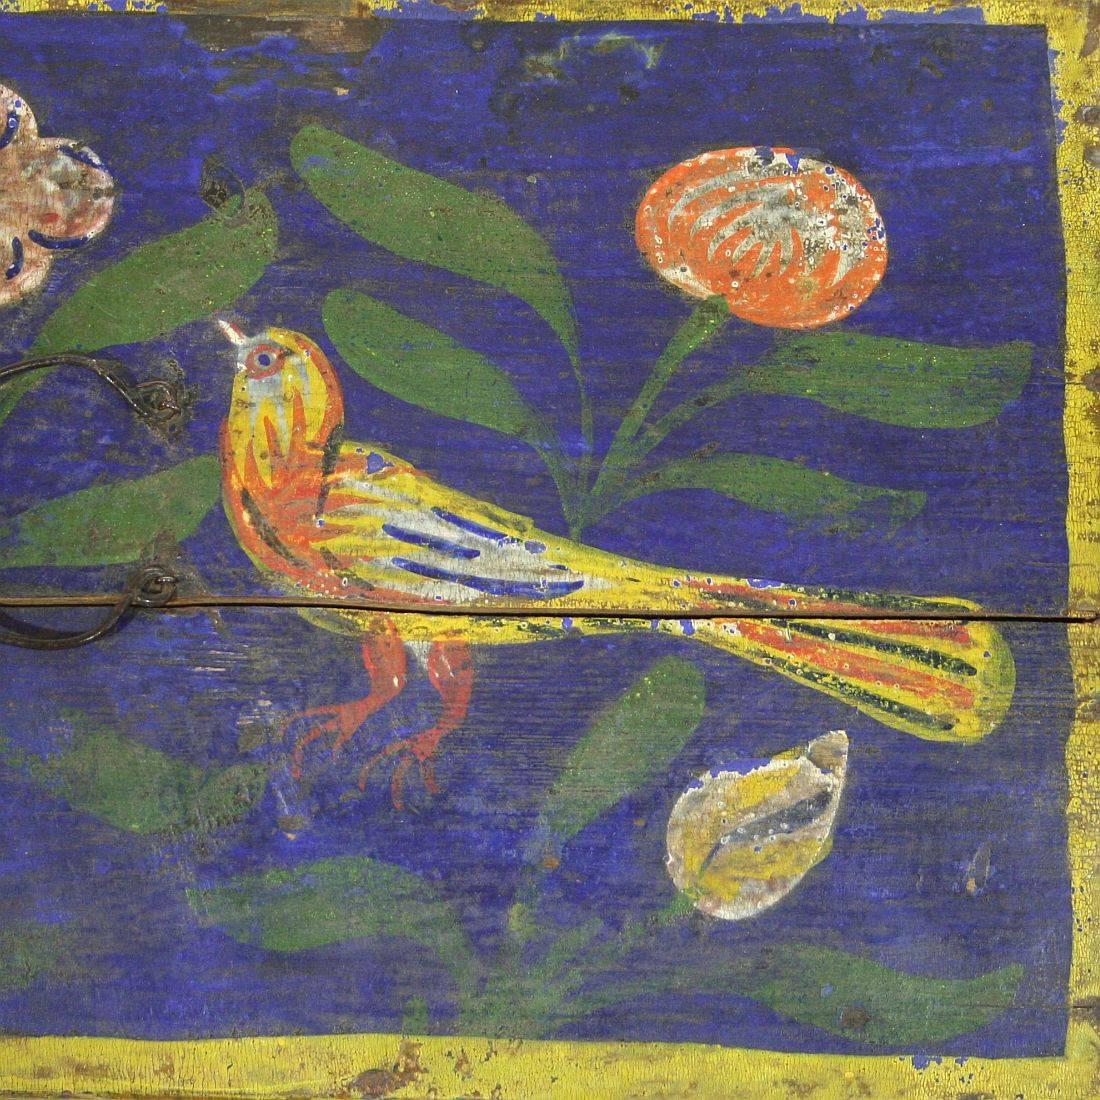 Painted wooden weddingbox with its original decor, the beautiful folk-art bird. Normandy, France, circa 1800-1850
Weathered and small repairs.